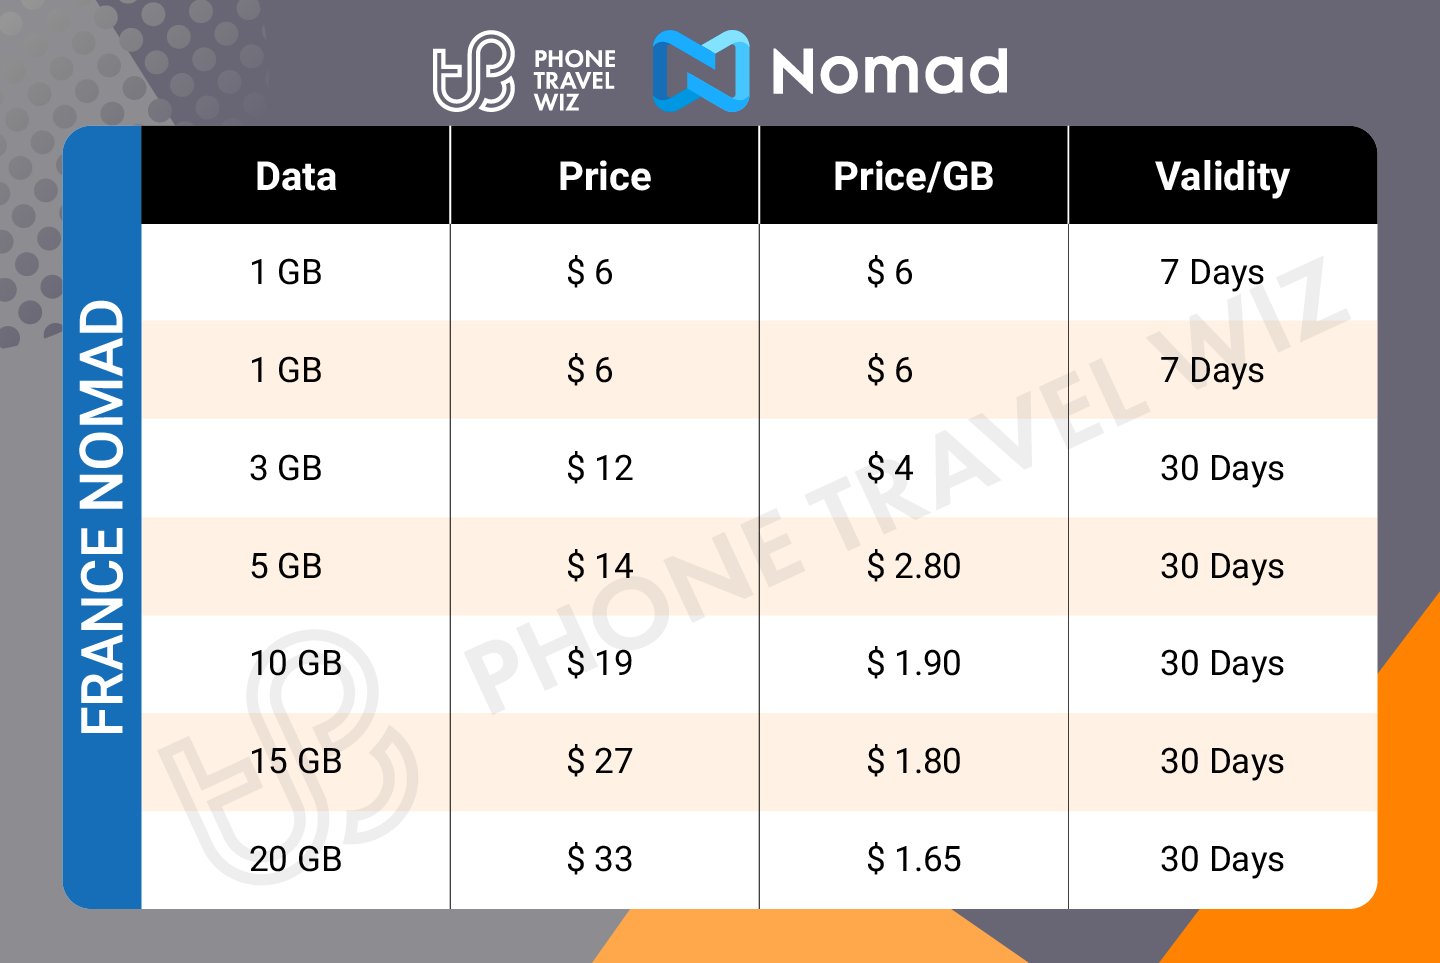 Nomad France eSIM Price & Data Details Infographic by Phone Travel Wiz